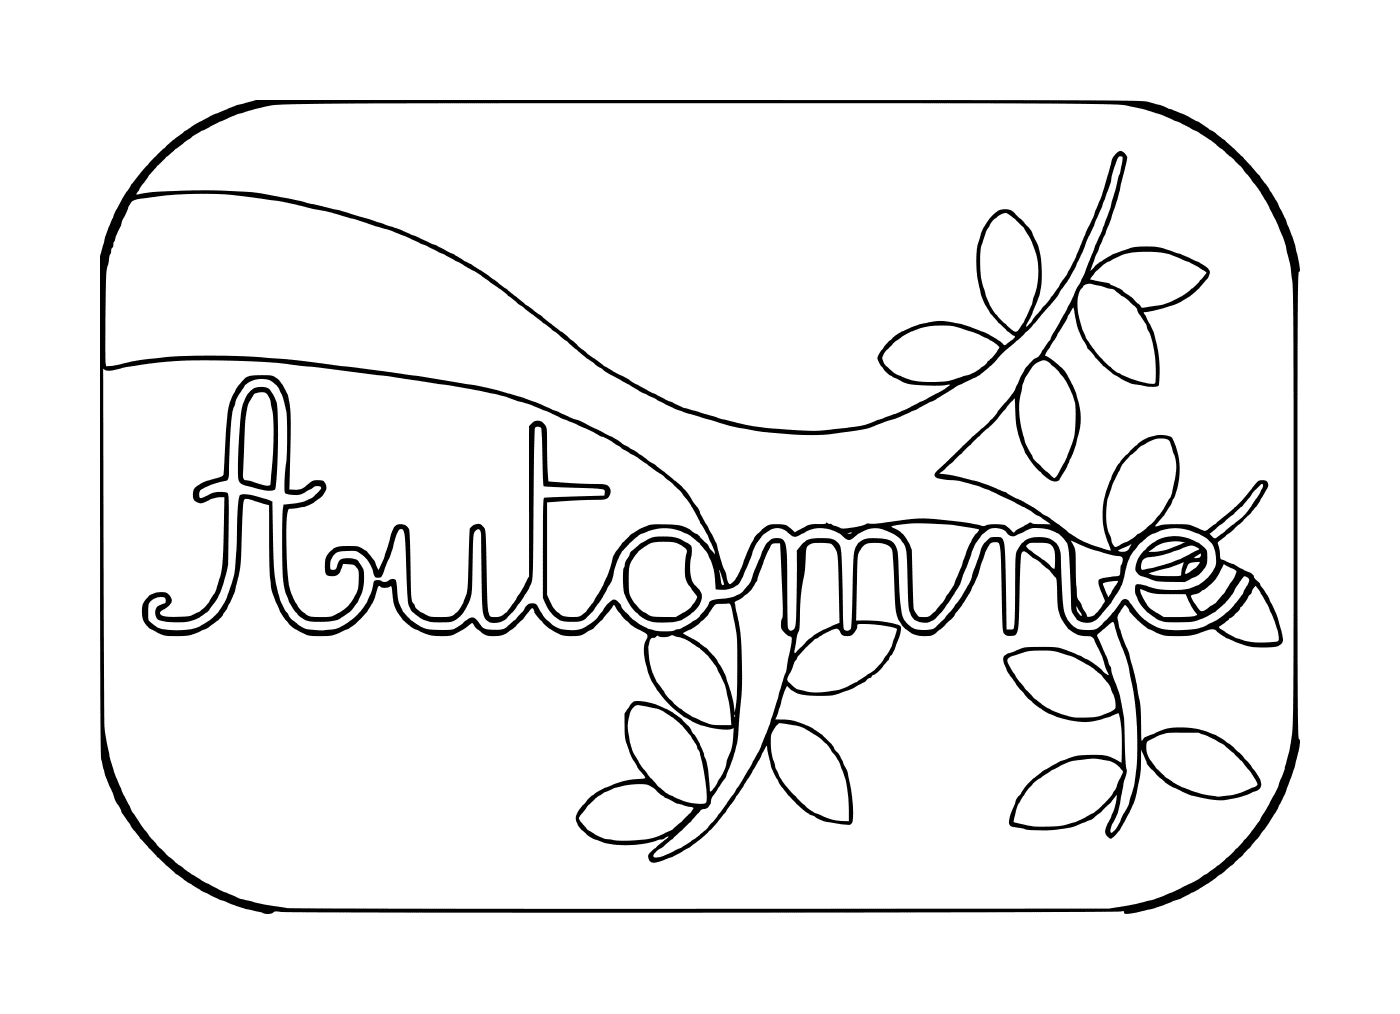 An image of the word autumn